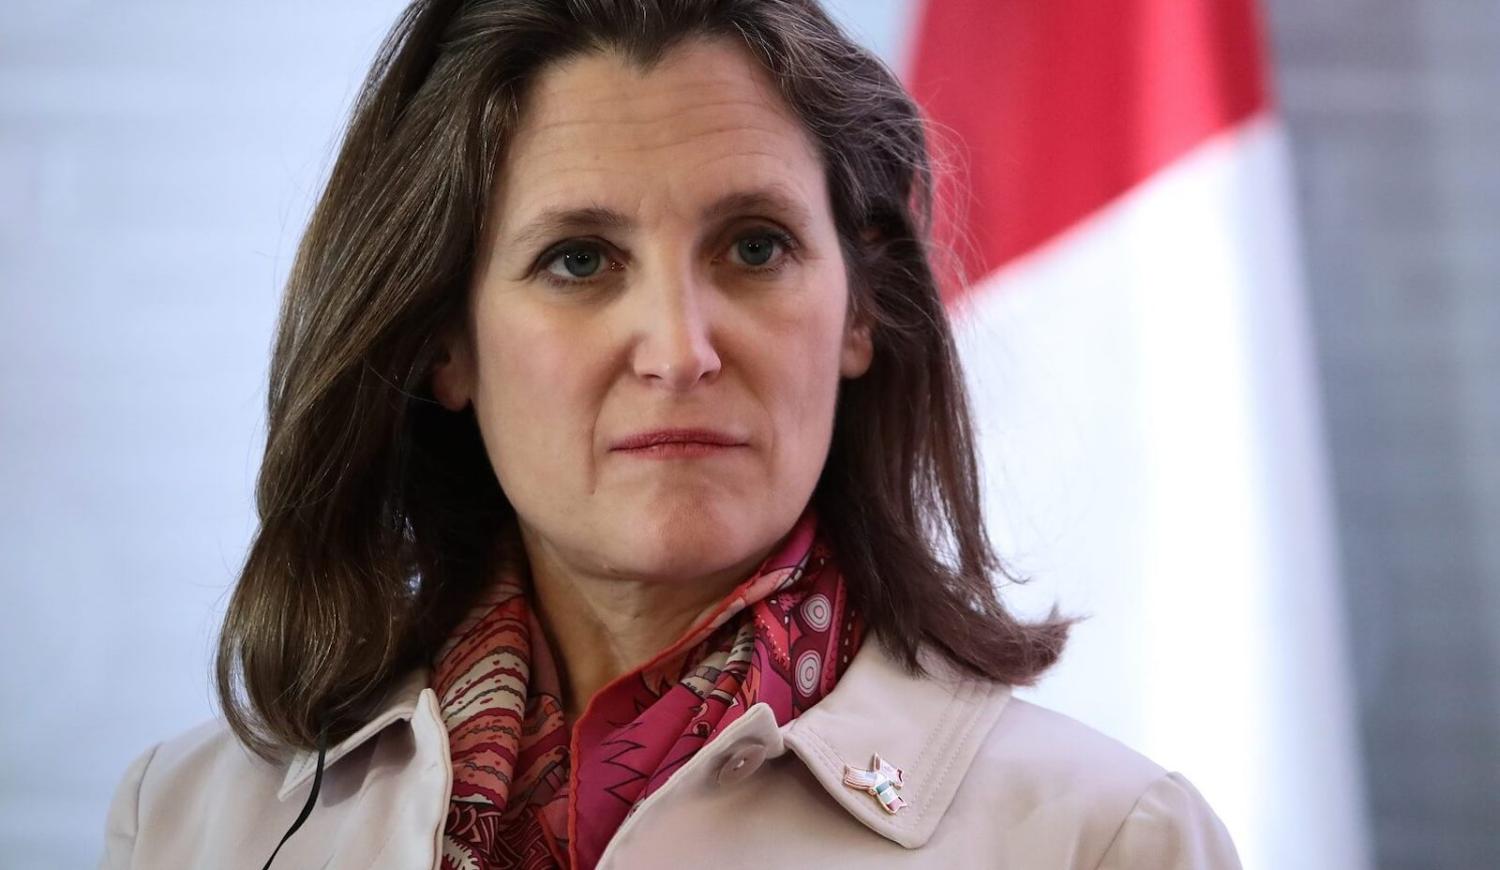 Canadian Foreign Minister Chrystia Freeland in Mexico City, 2 February 2018 (Photo: Hector Vivas/Getty)